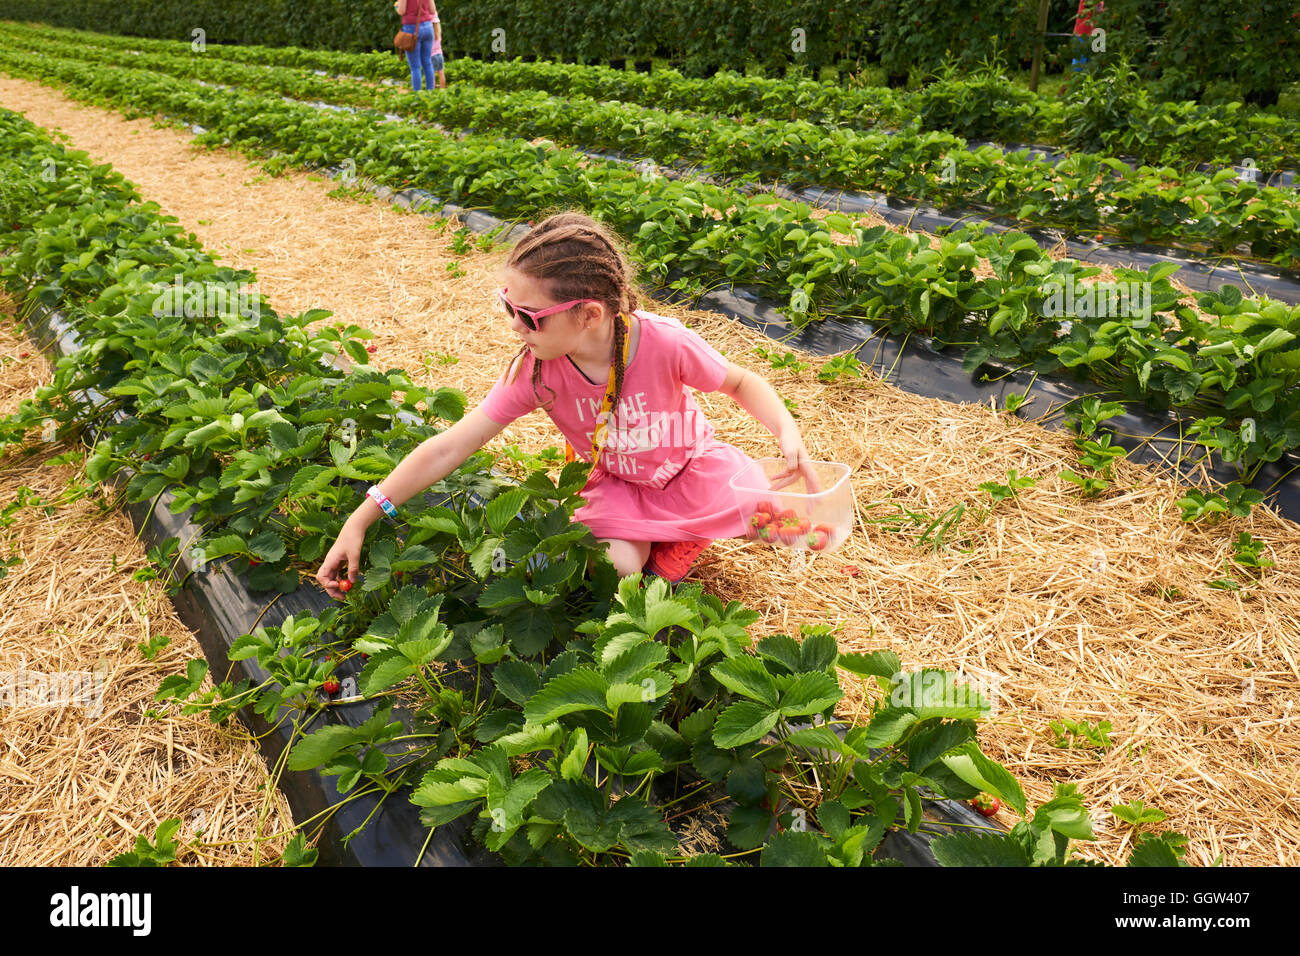 Young Girl Picking Strawberries At A Pick Your Own Soft Fruit Farm In Warwickshire UK Stock Photo